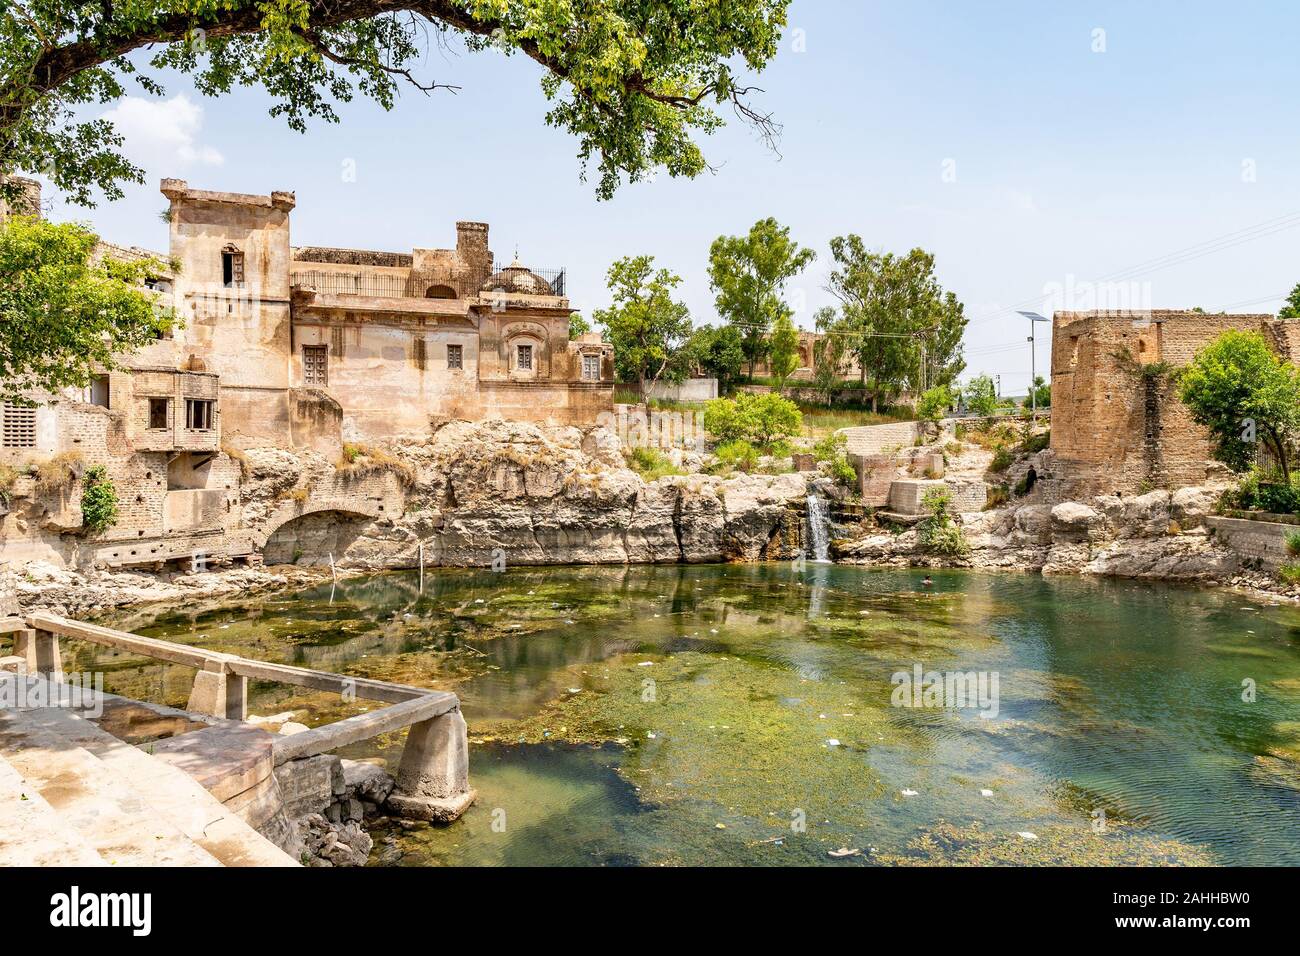 Chakwal Qila Katas Raj Hindu Temples Dedicated to Shiva Picturesque View of the Pond on a Sunny Blue Sky Day Stock Photo